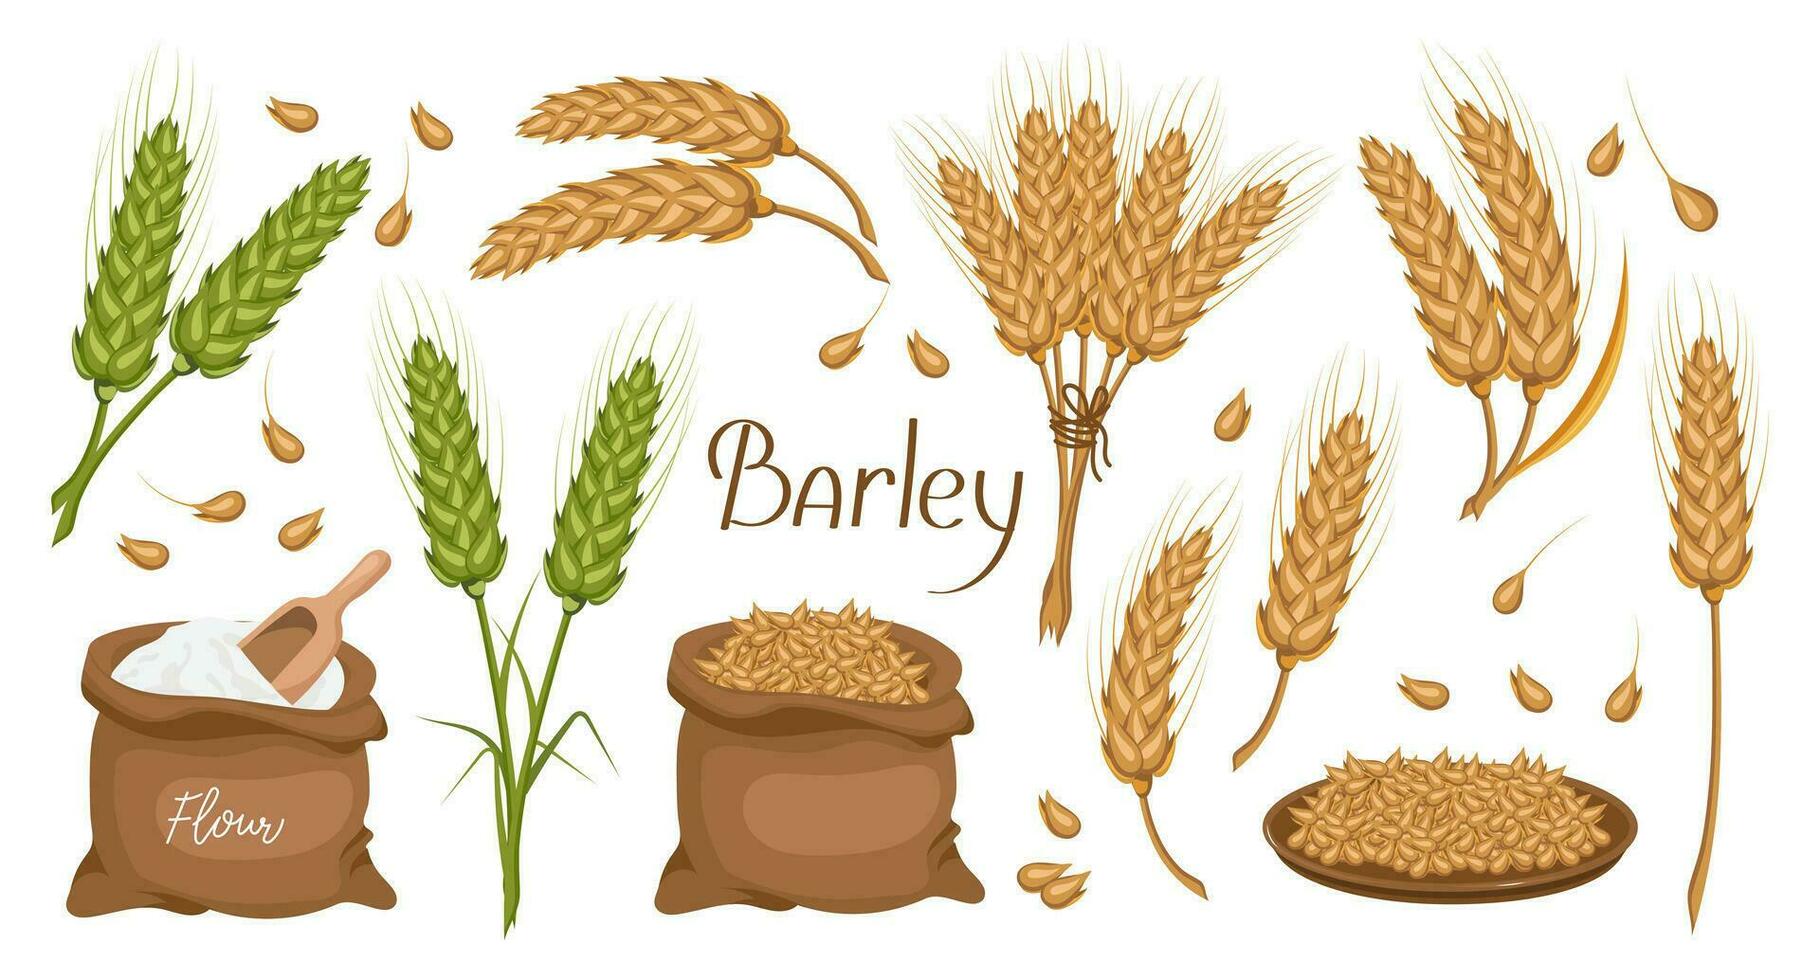 A set of grains and spikelets of barley. Barley plant, barley grains in a plate and bag. Agriculture, design elements, vector